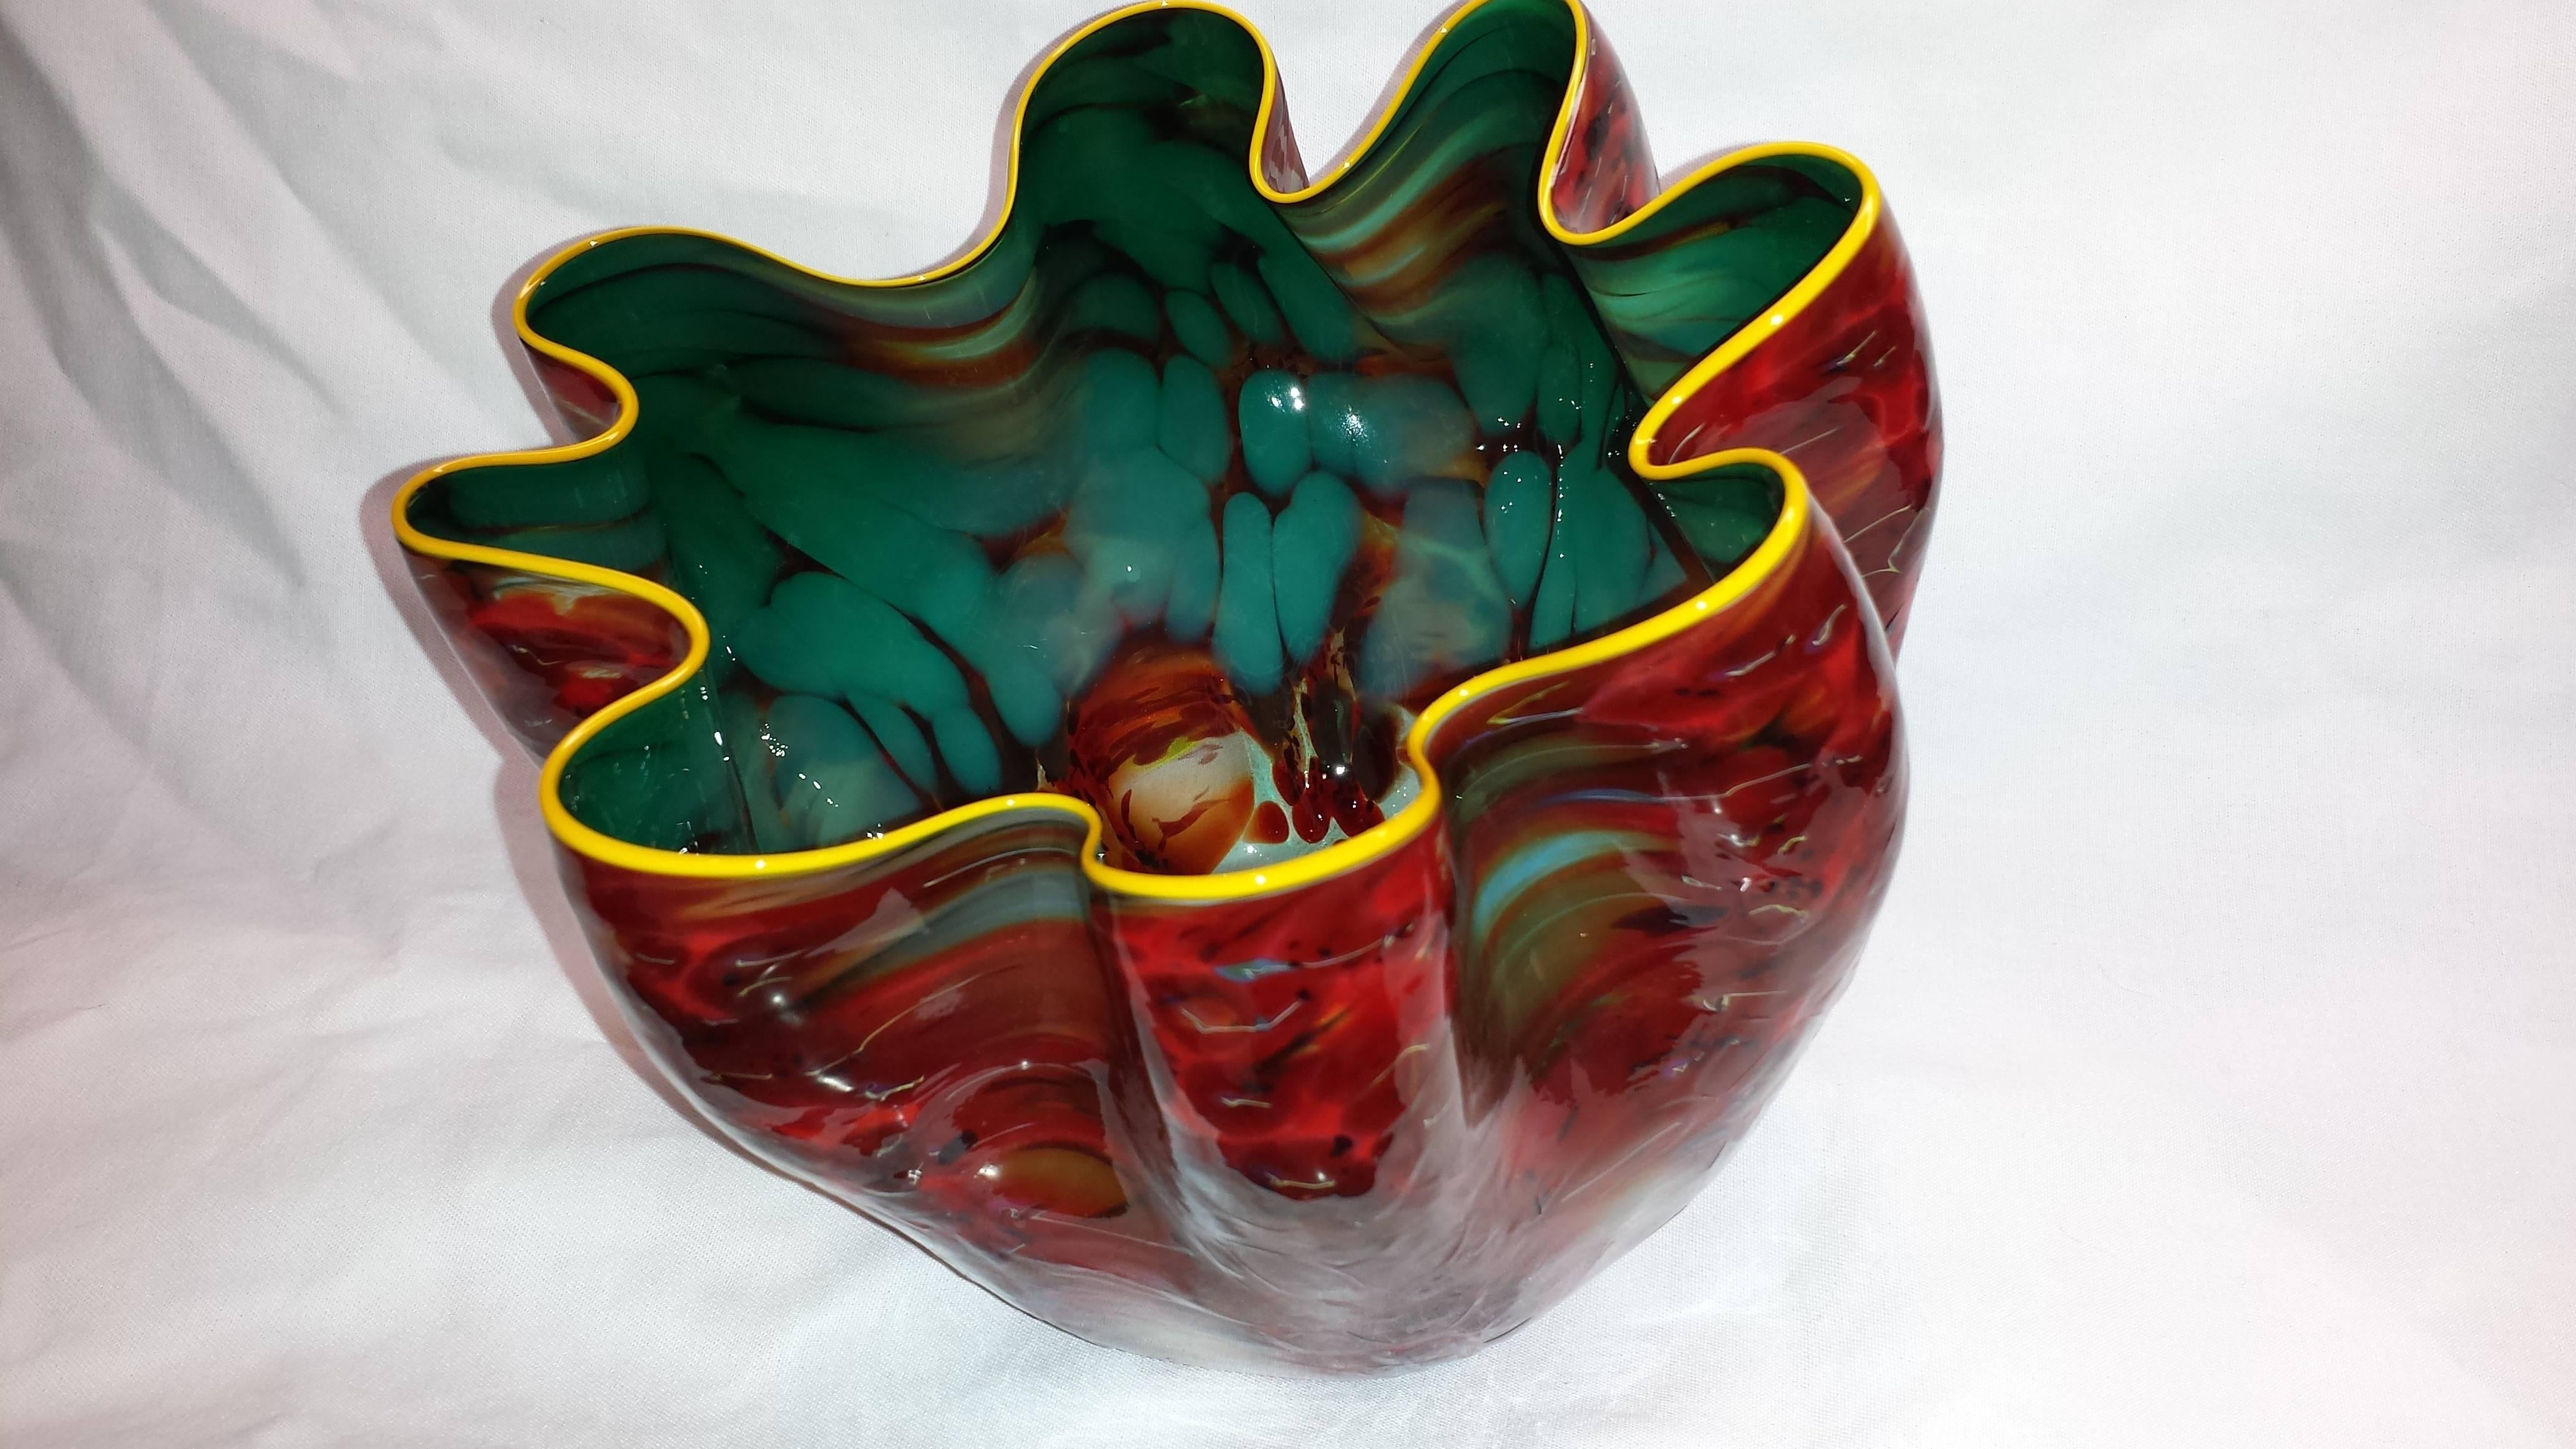 Dale Chihuly (American, b. 1941), Firefly Macchia for Portland Press, Studio Edition, 2008, signed and dated 